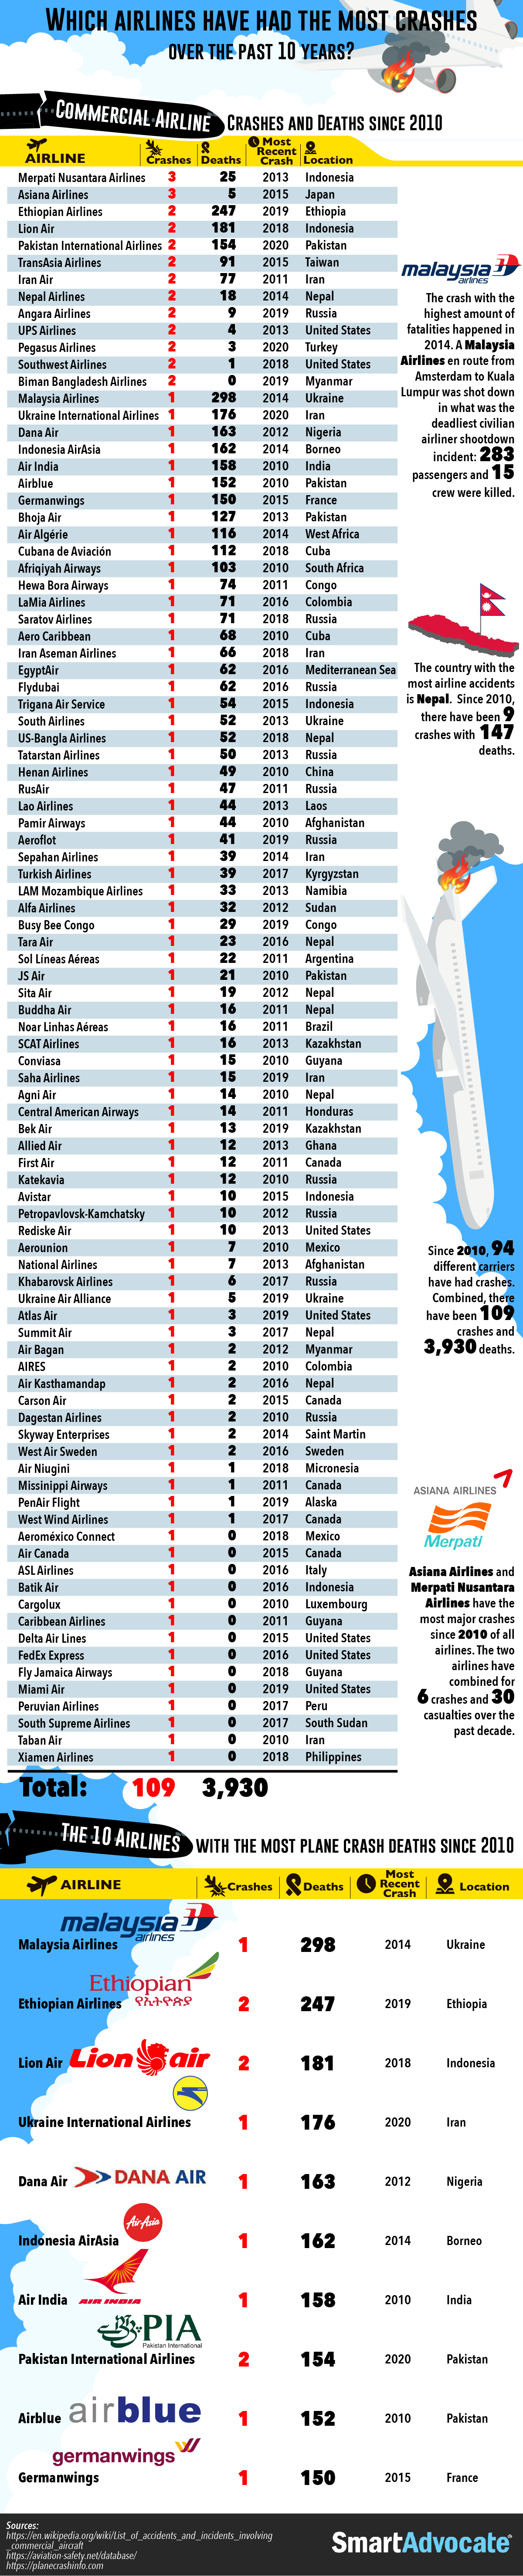 Which Airlines Have Had the Most Crashes Over the Past 10 Years?